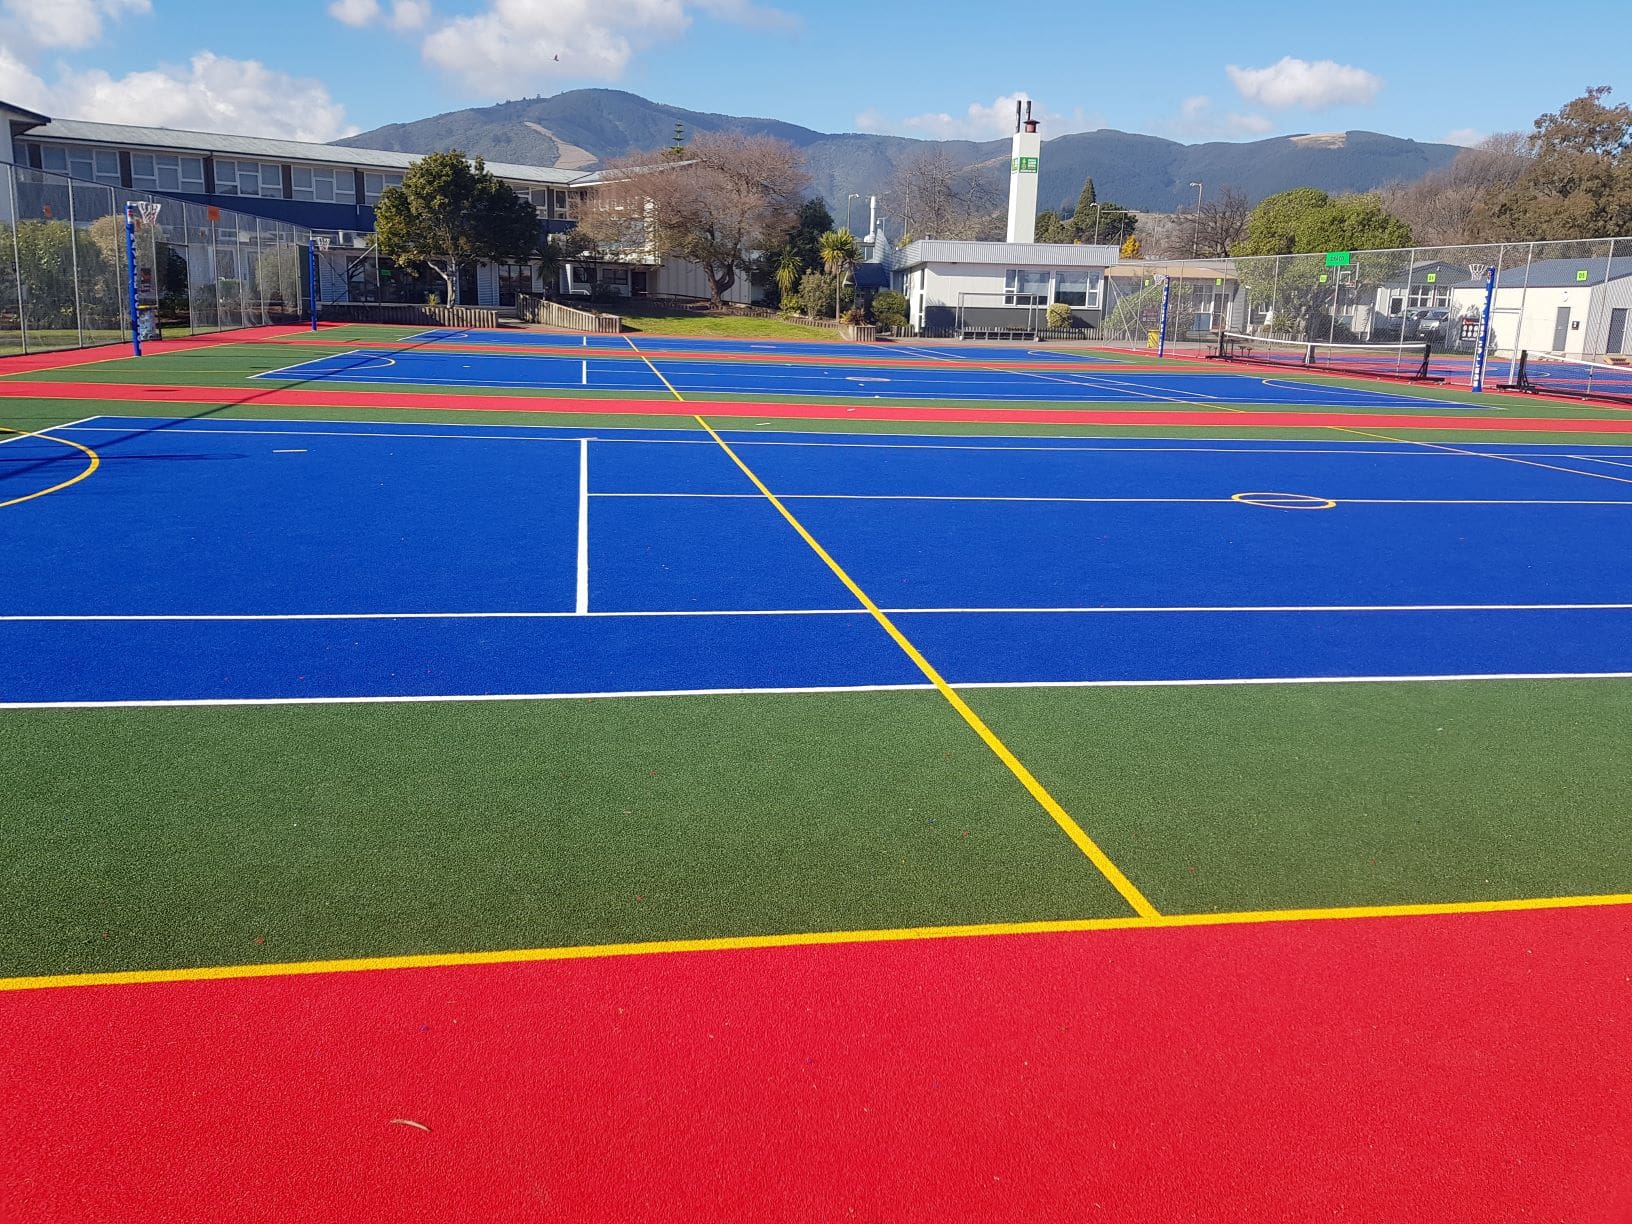 Nayland college basketball court field view